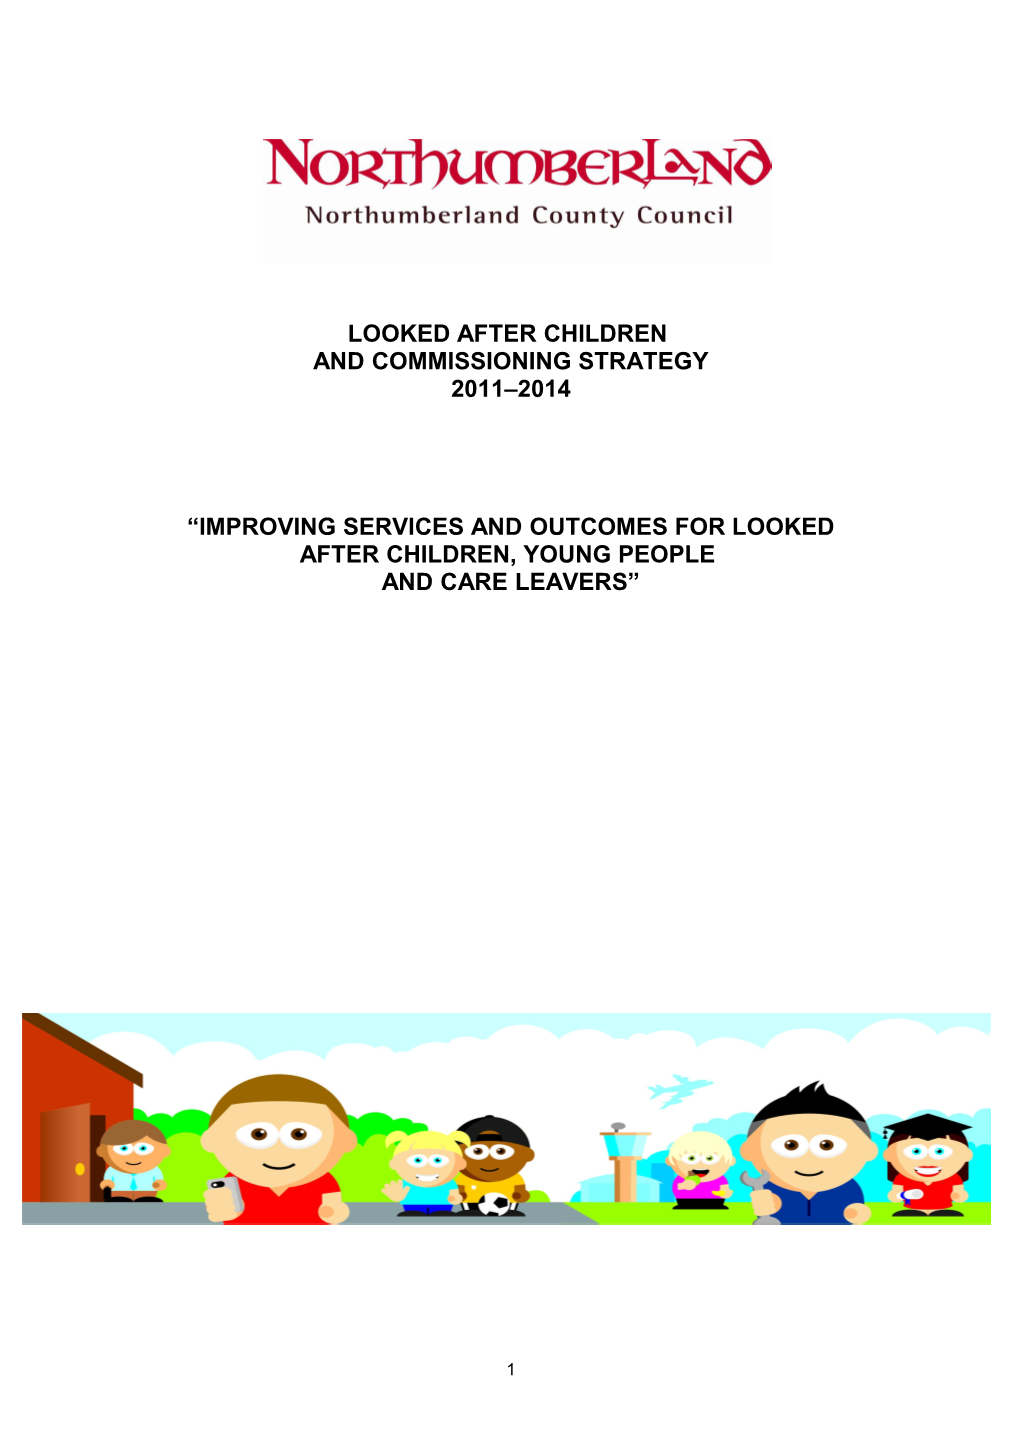 Improving Services and Outcomes for Looked After Children, Young People